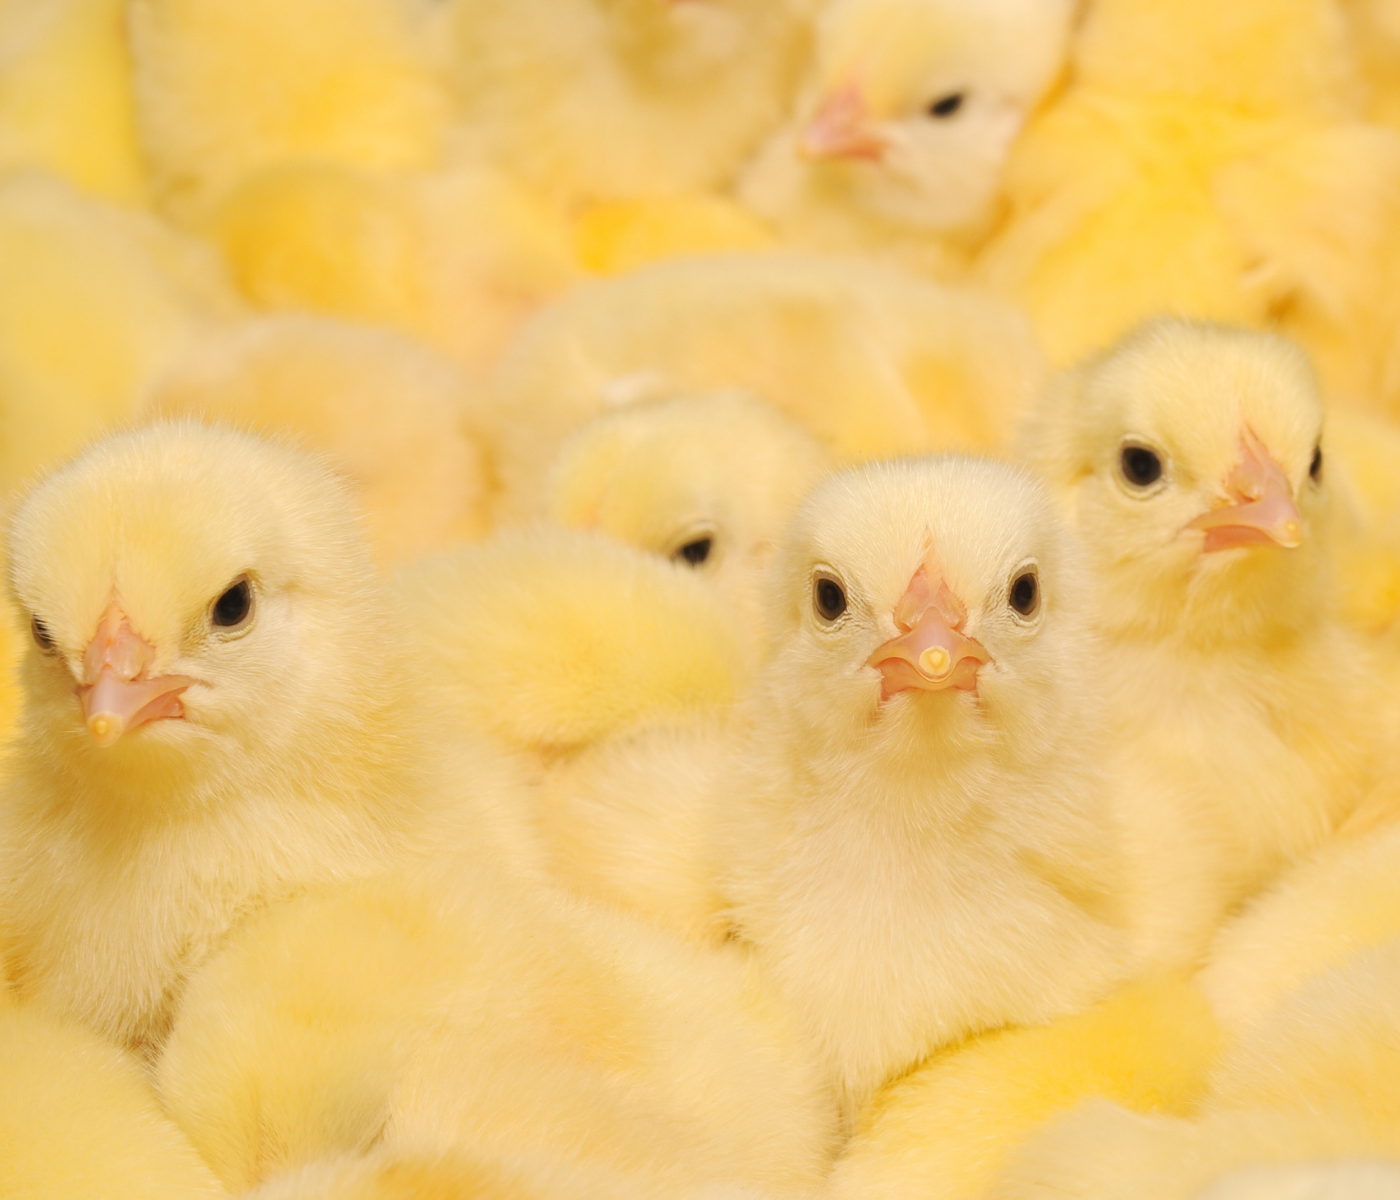 Quality chicks born in the hatchery: care and monitoring that make a difference